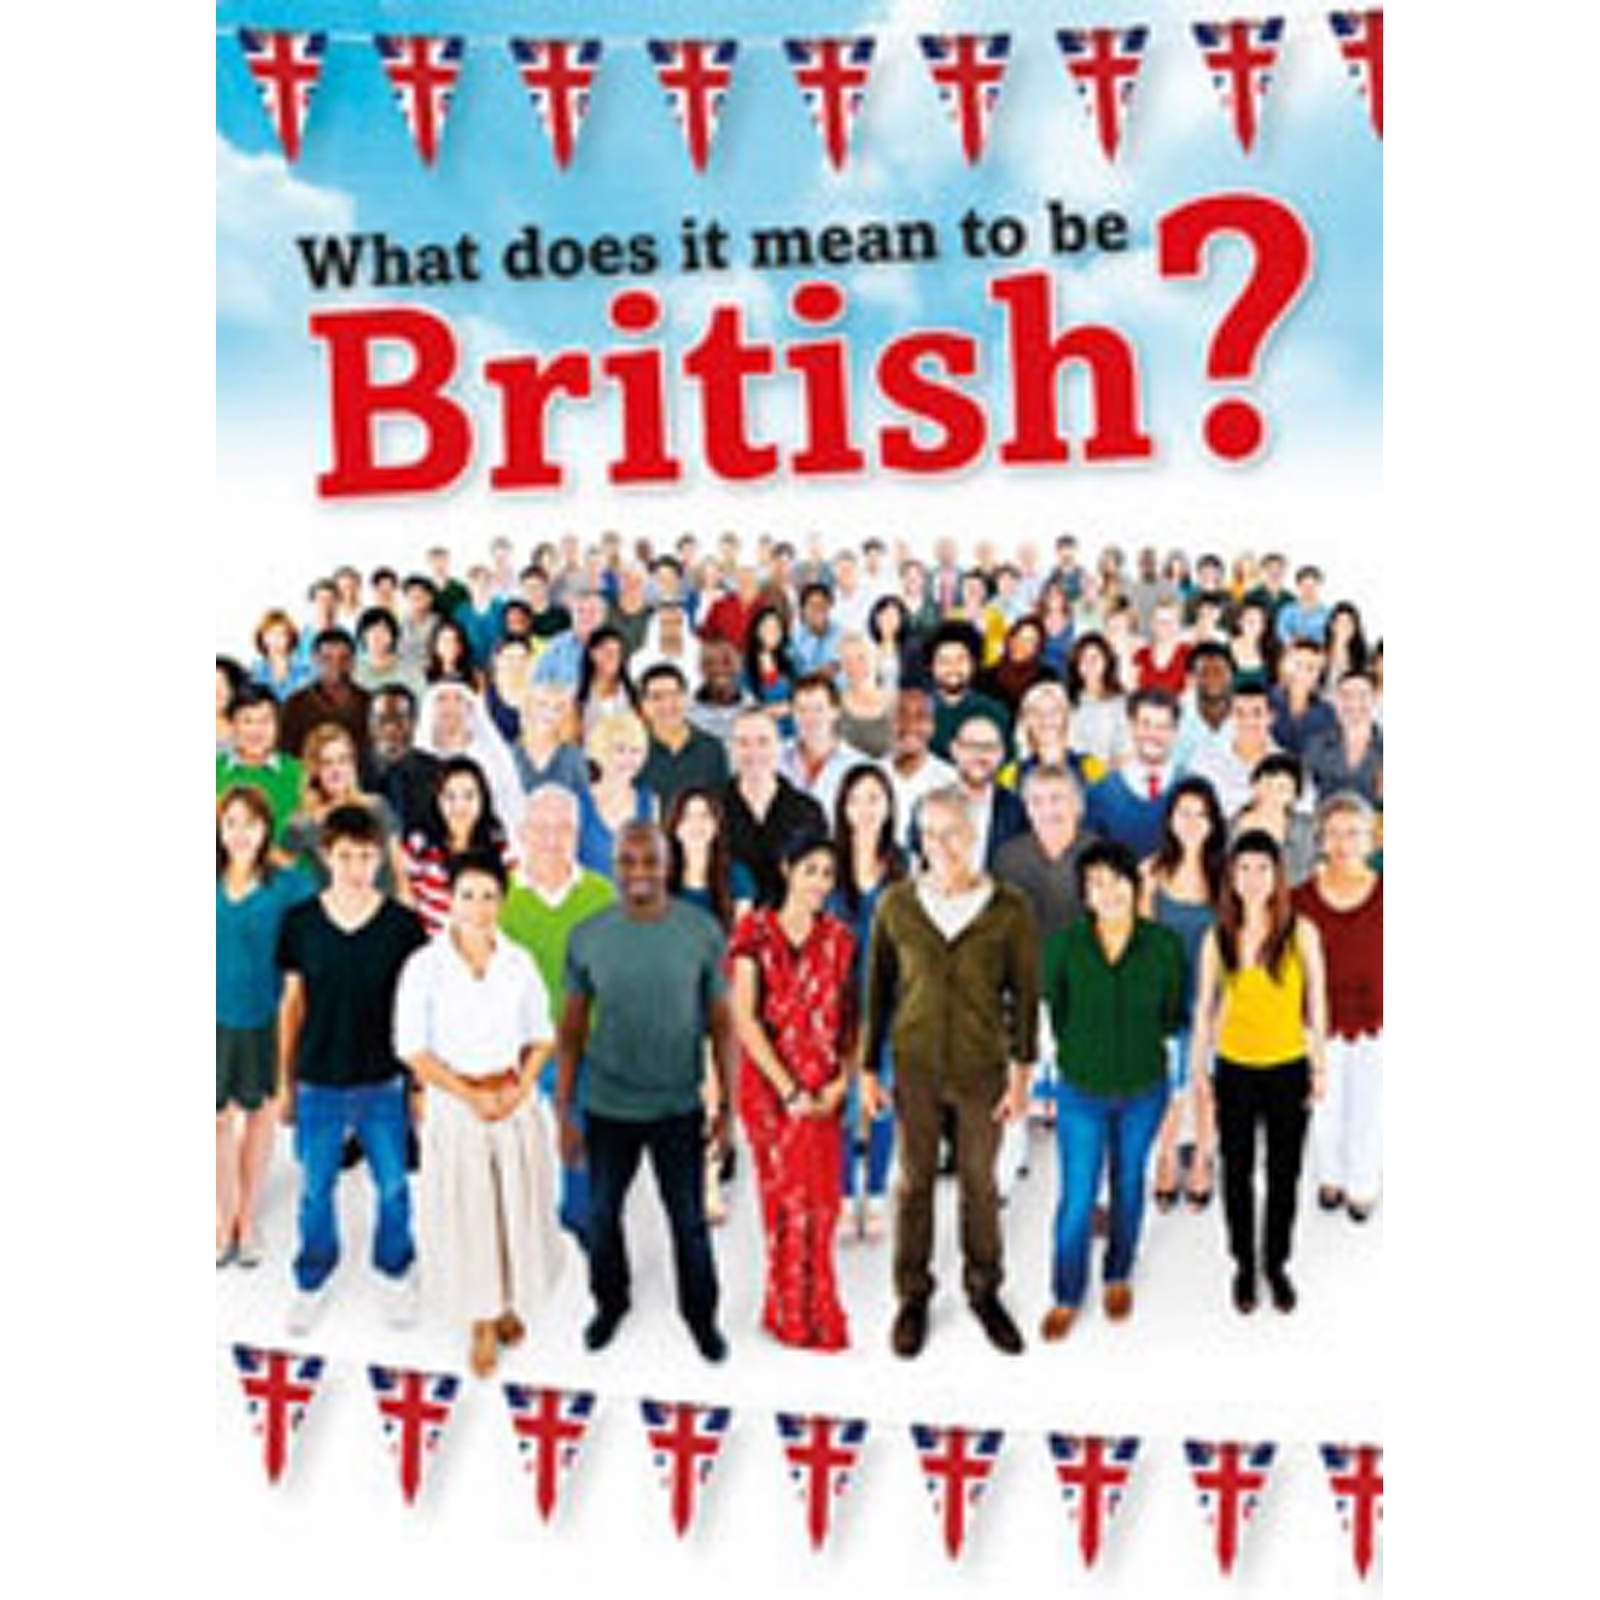 What Does it Mean to be British?